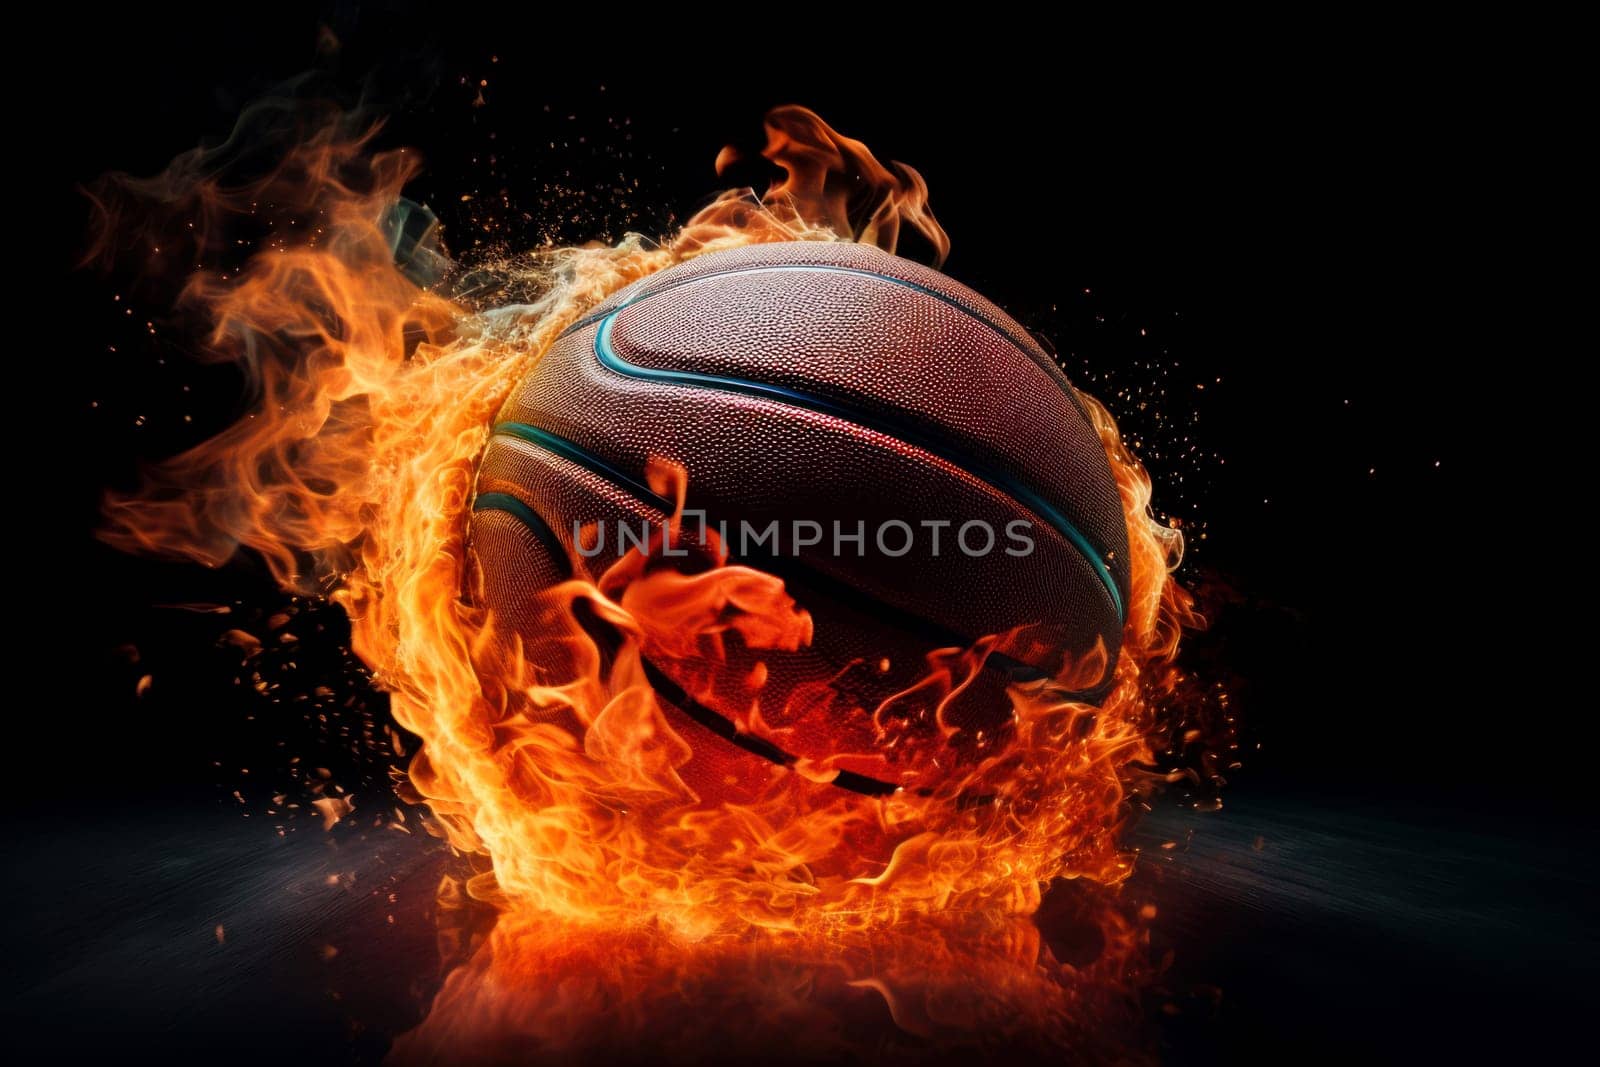 Basketball ball in fire. Sport play game. Generate Ai